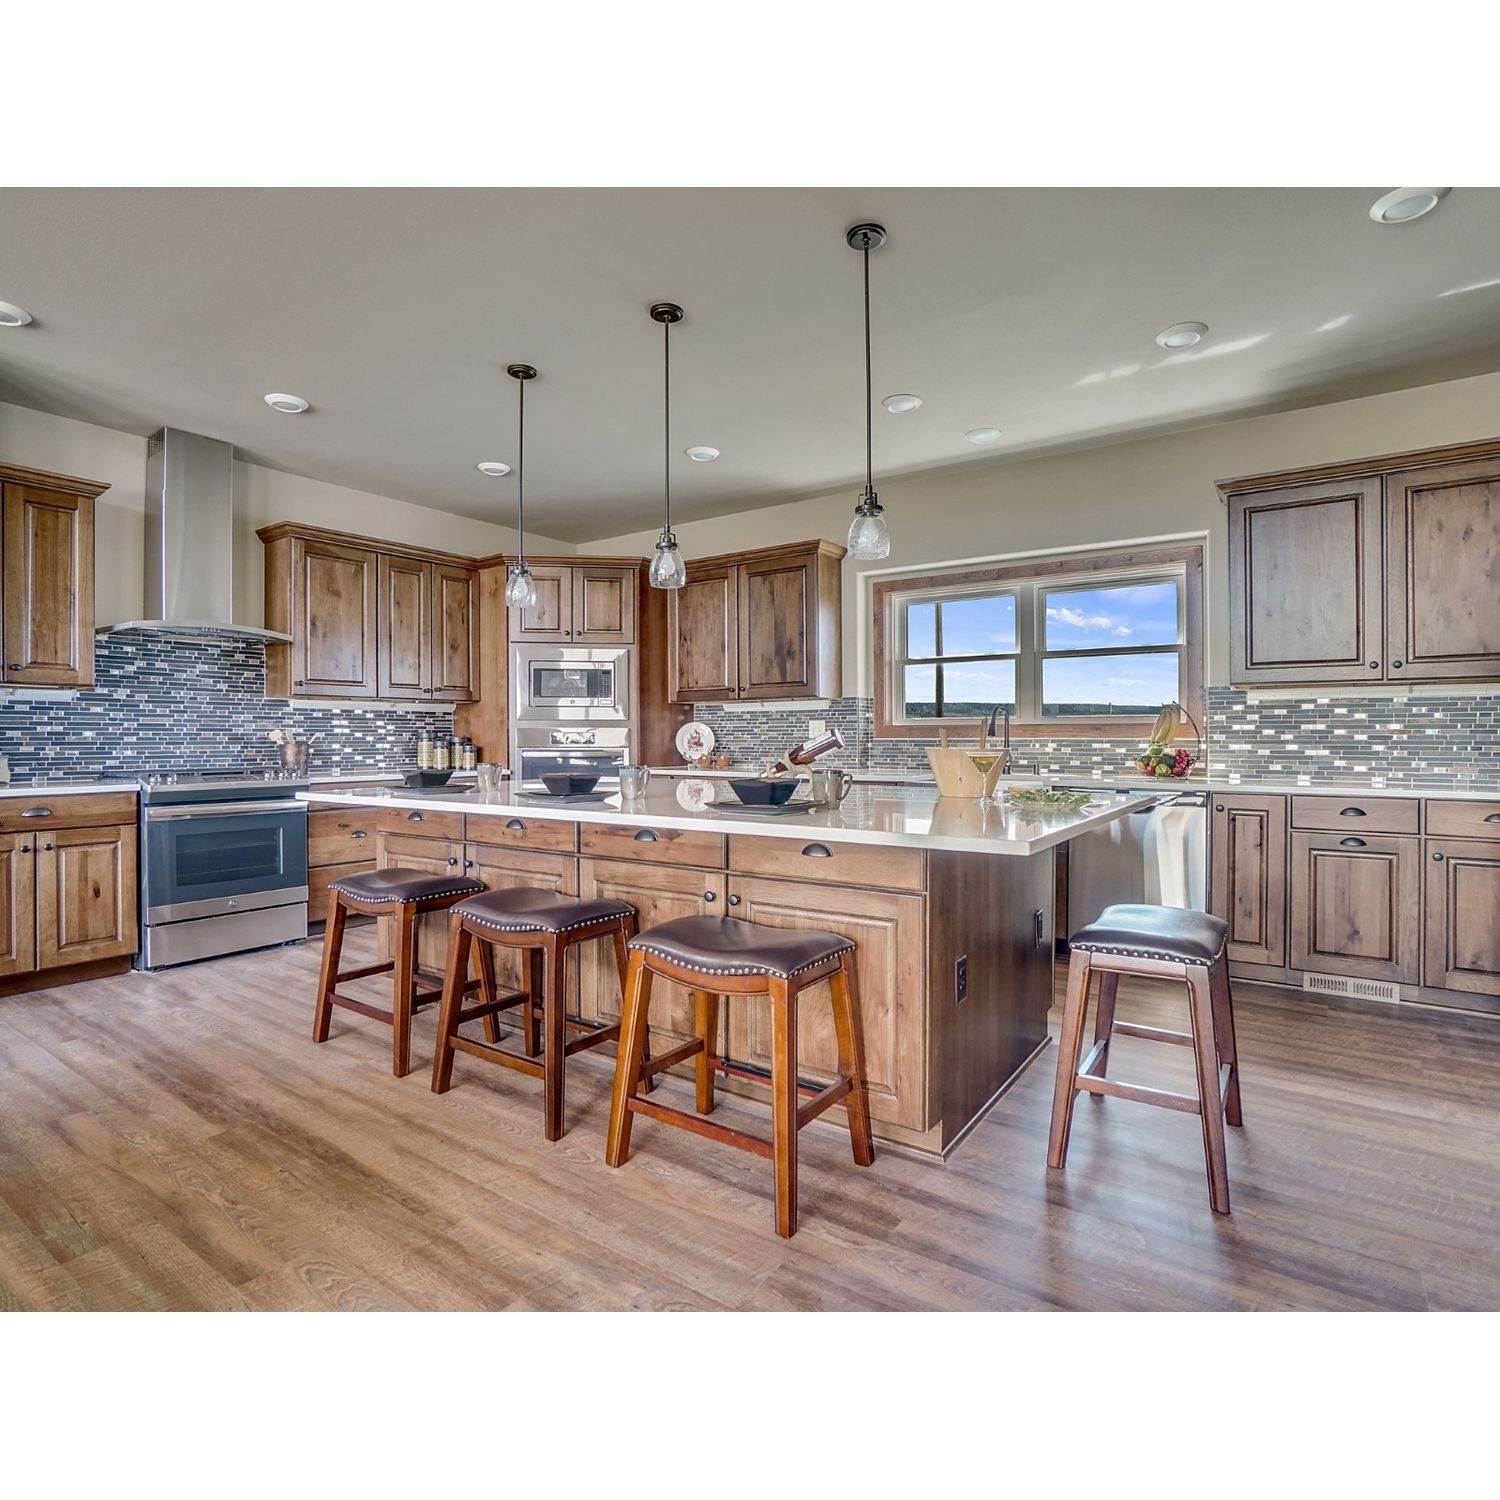 28. Build on Your Lot by Seeger Homes κτίριο σε 4783 Farmingdale Drive, Colorado Springs, CO 80918